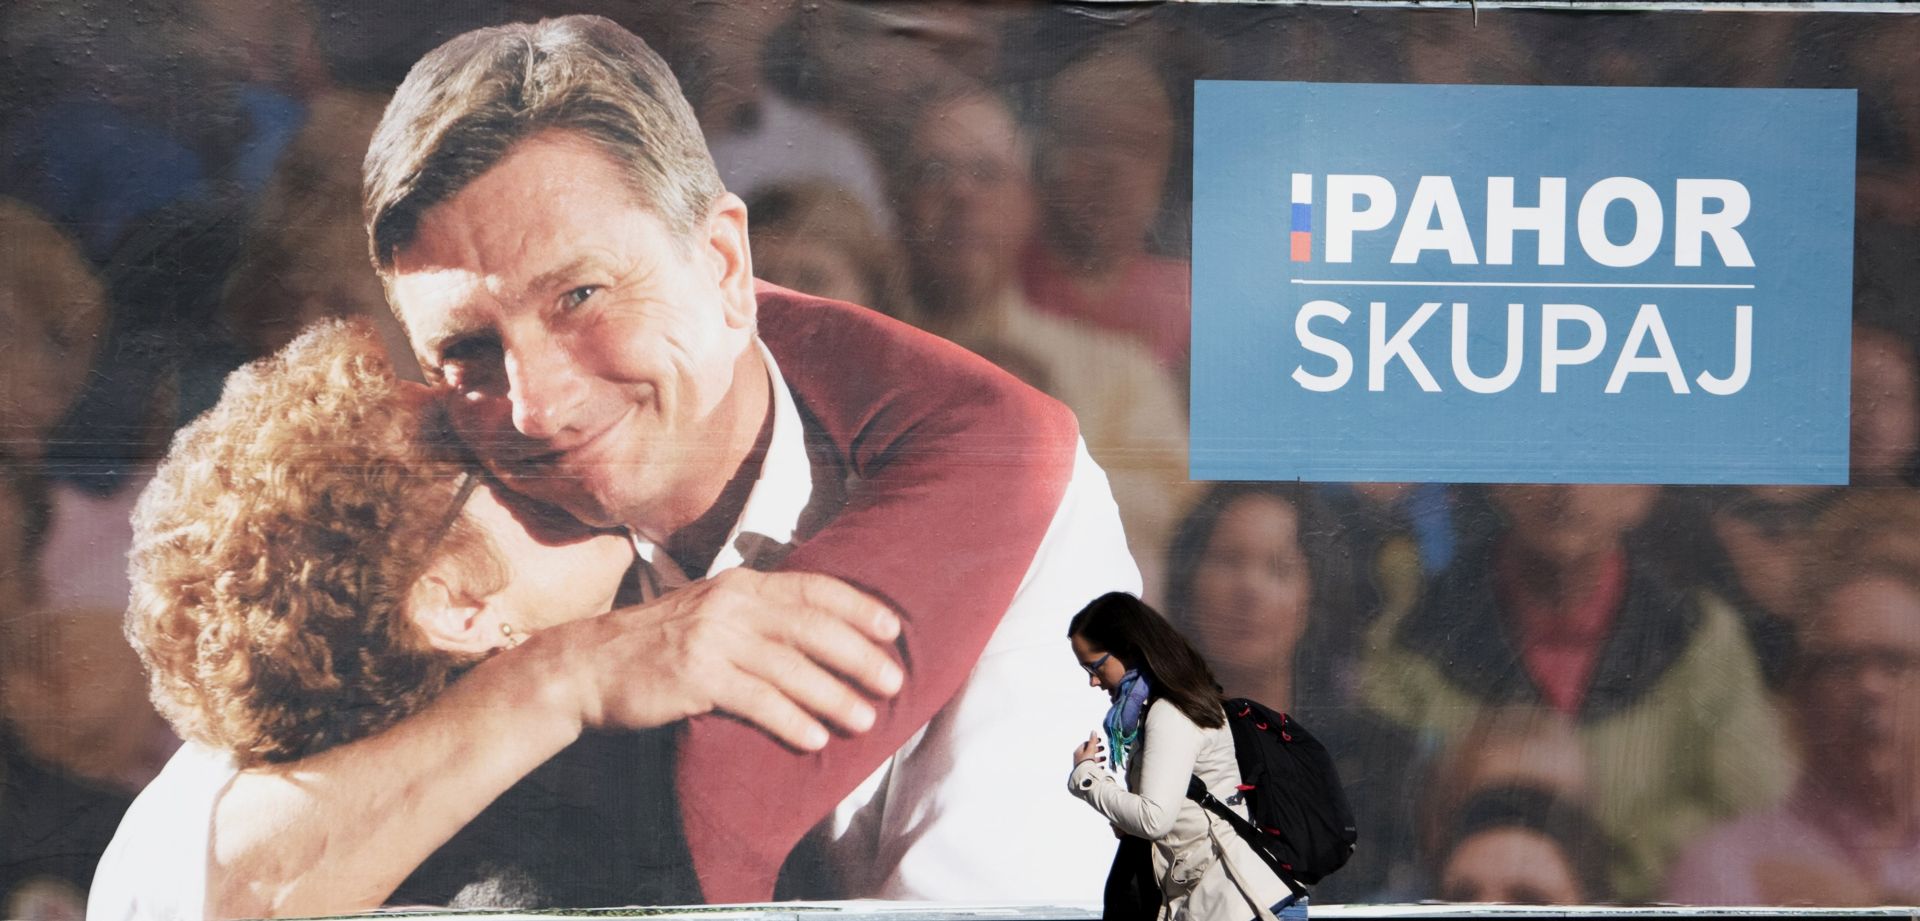 epa06273123 A person on rollerblades passes an election poster showing Borut Pahor, current President of Slovenia and Independent candidate for the Slovenian Presidential Elections 2017, in Ljubljana, Slovenia, 18 October 2017. The Slovenian Presidential Elections take place in Slovenia on 22 October 2017.  EPA/IGOR KUPLJENIK